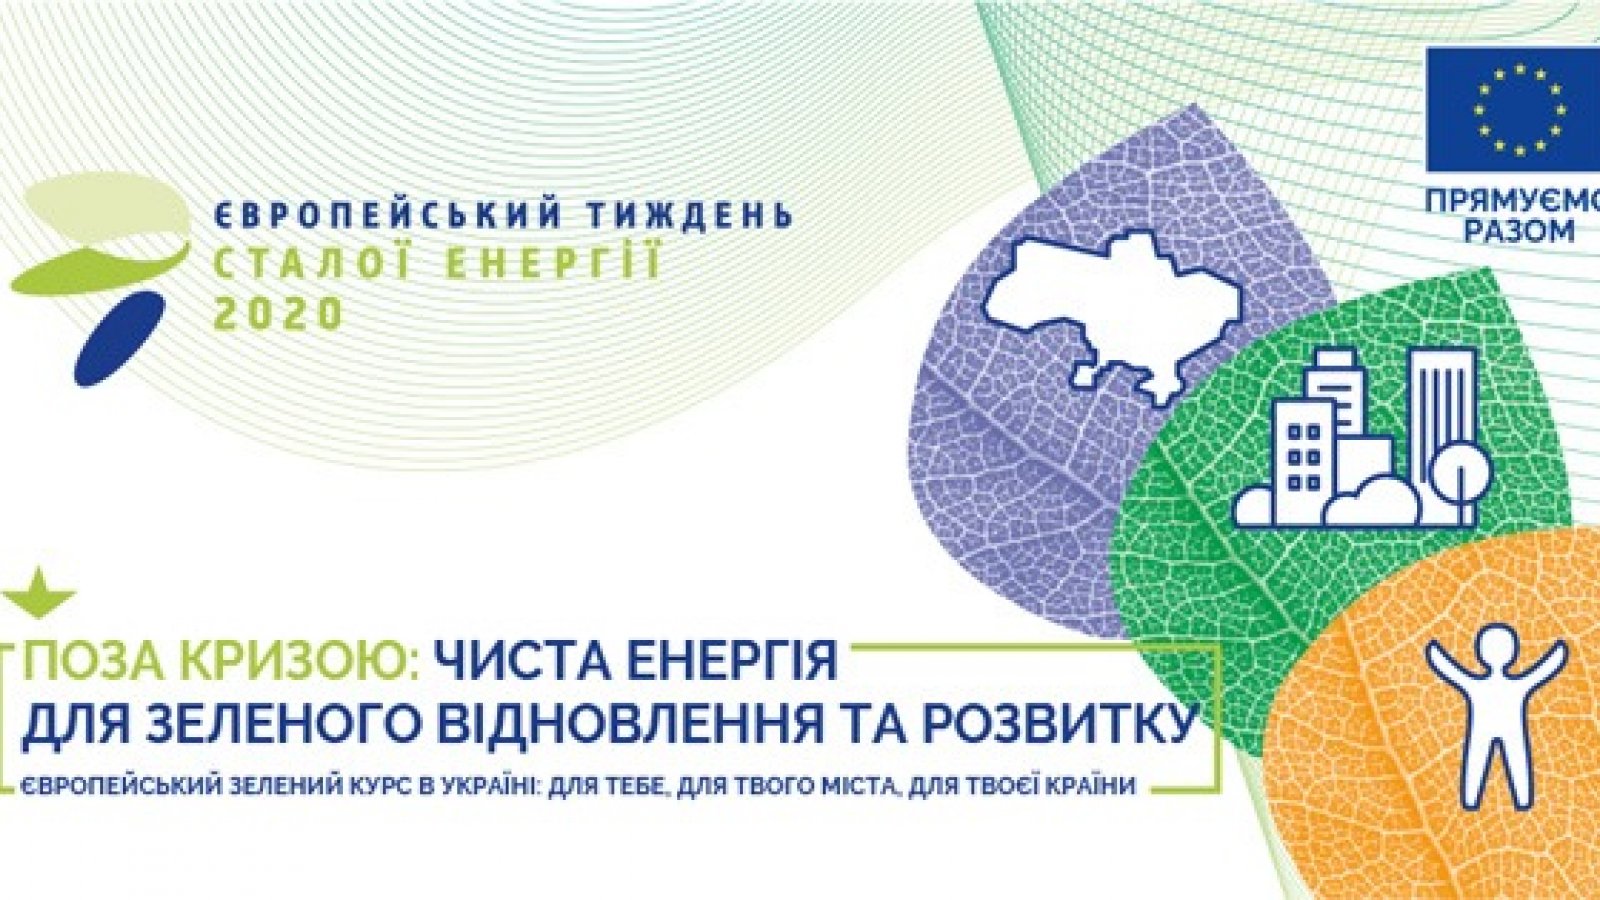 EU4Energy: Ukraine joins EU Sustainable Energy Week 2020 celebrations with numerous virtual events and activities